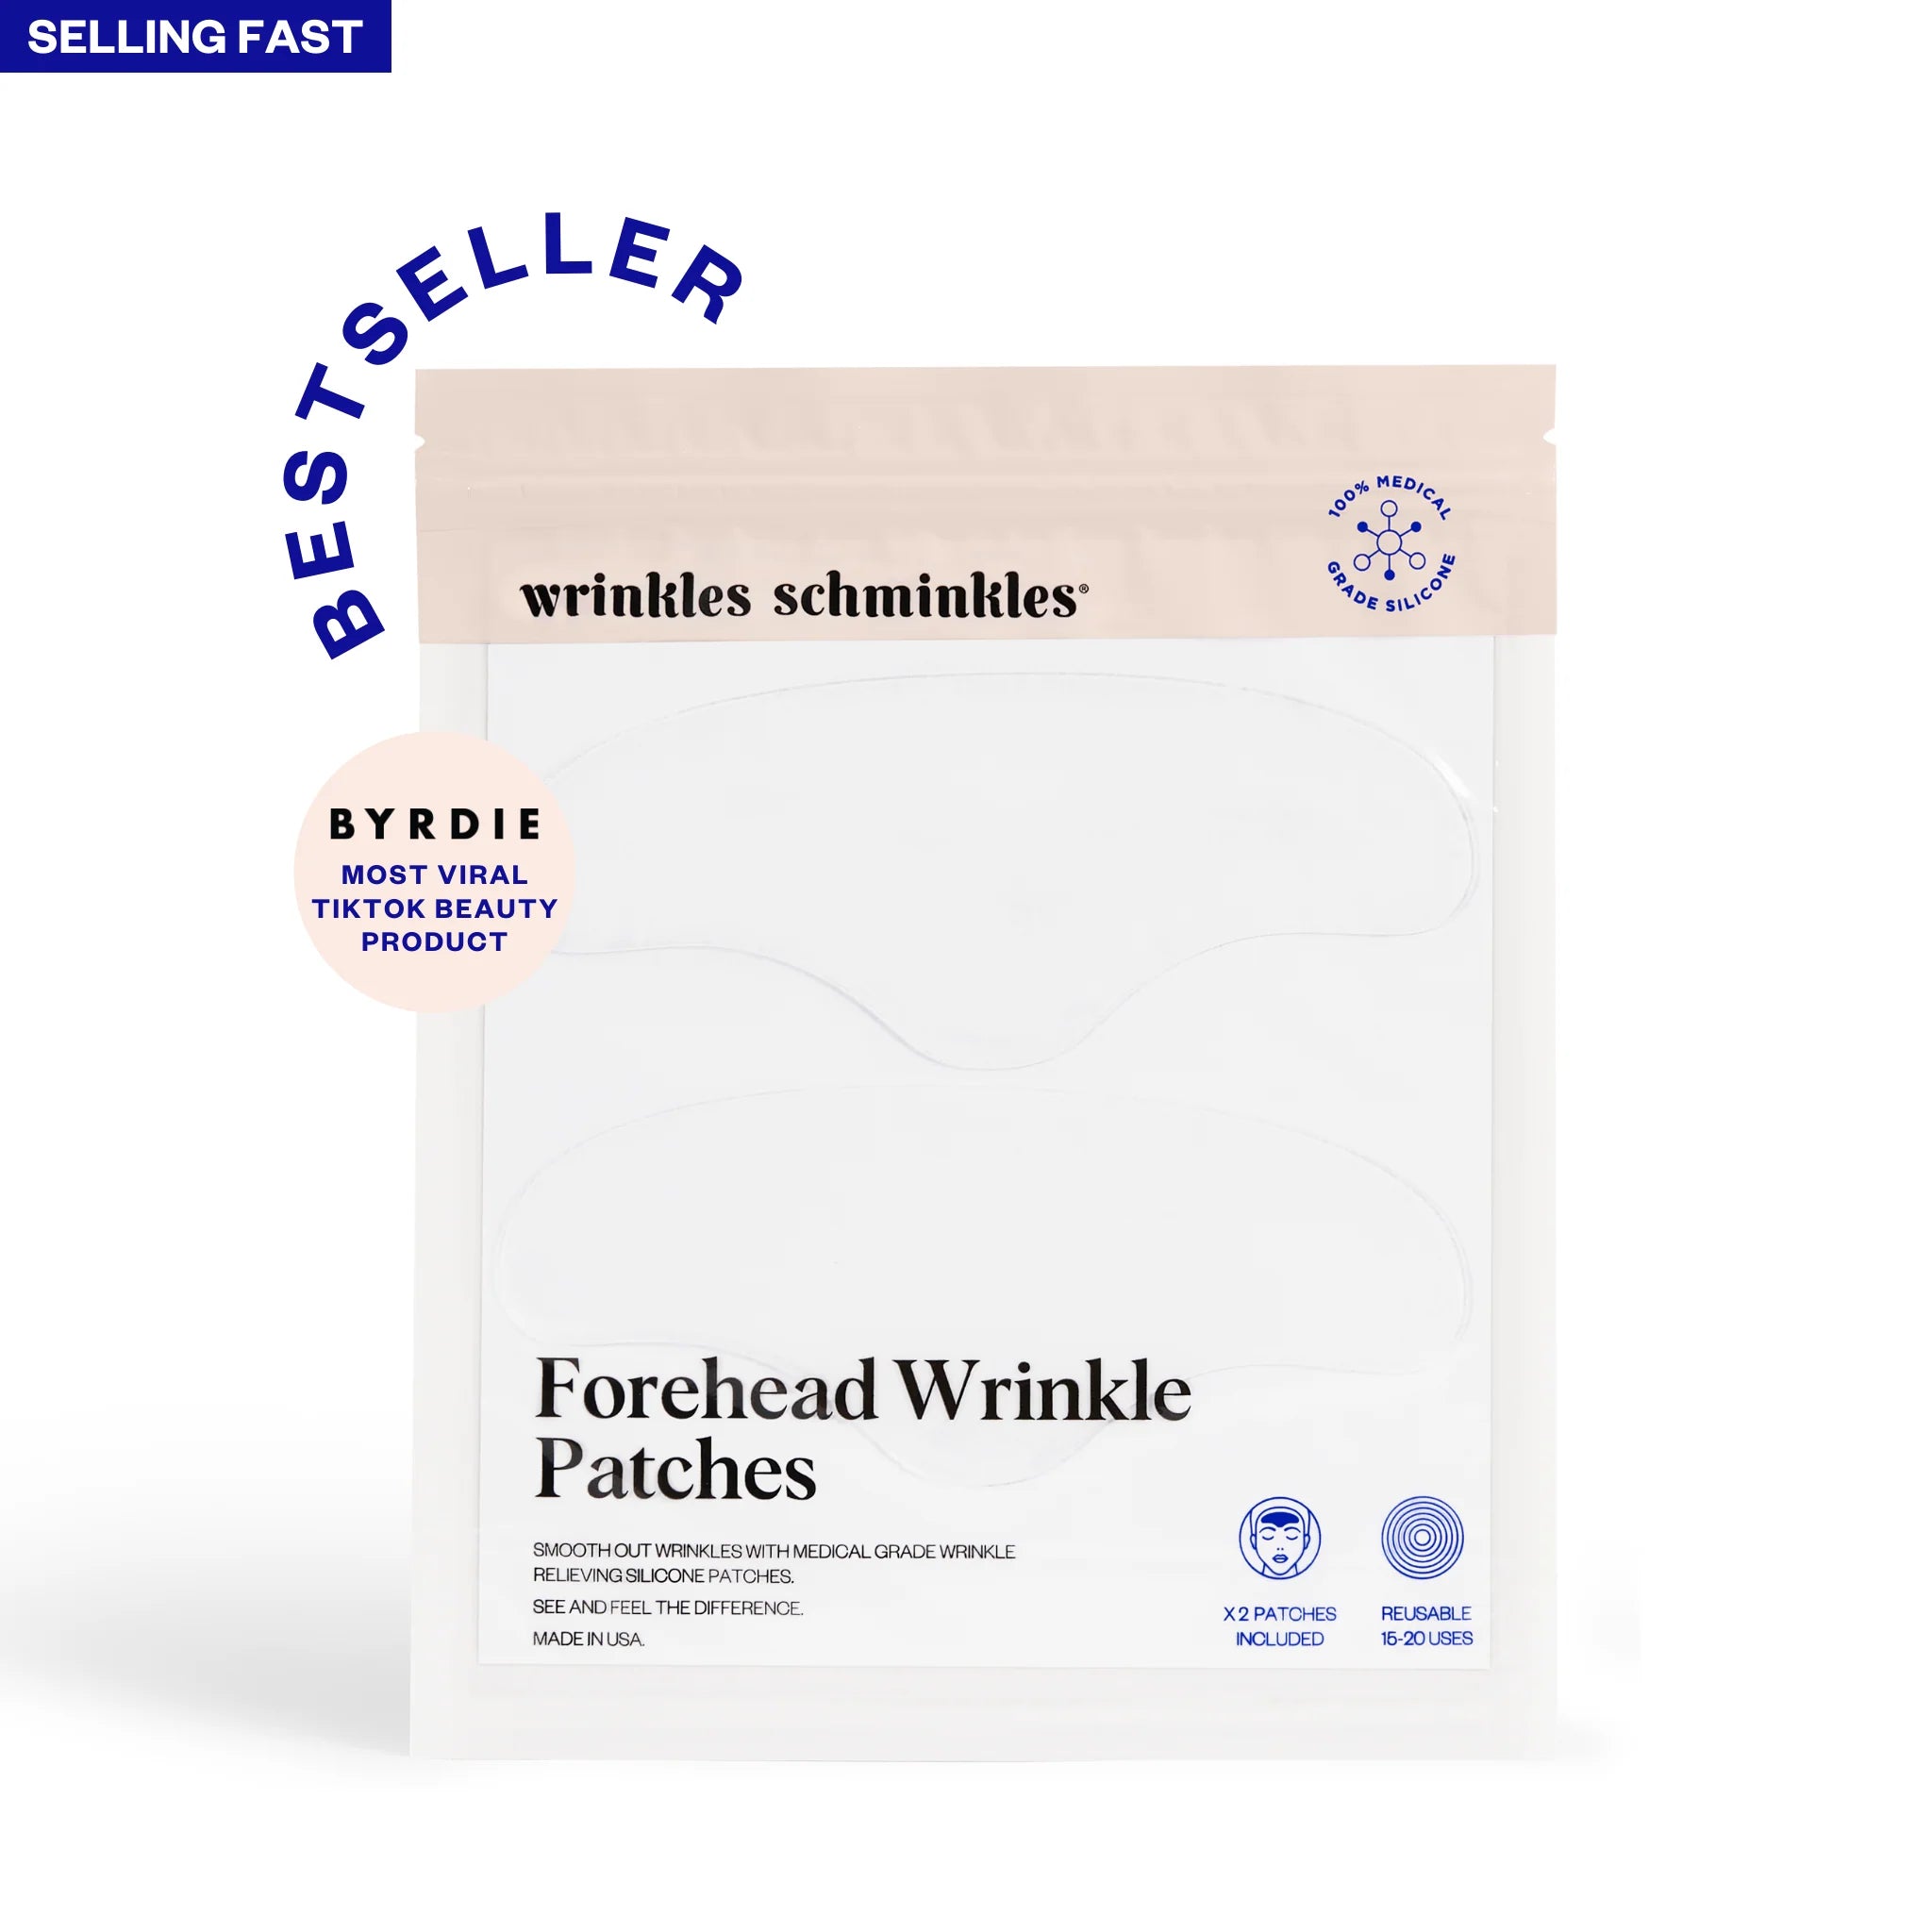 Serum Patch for Forehead Wrinkles